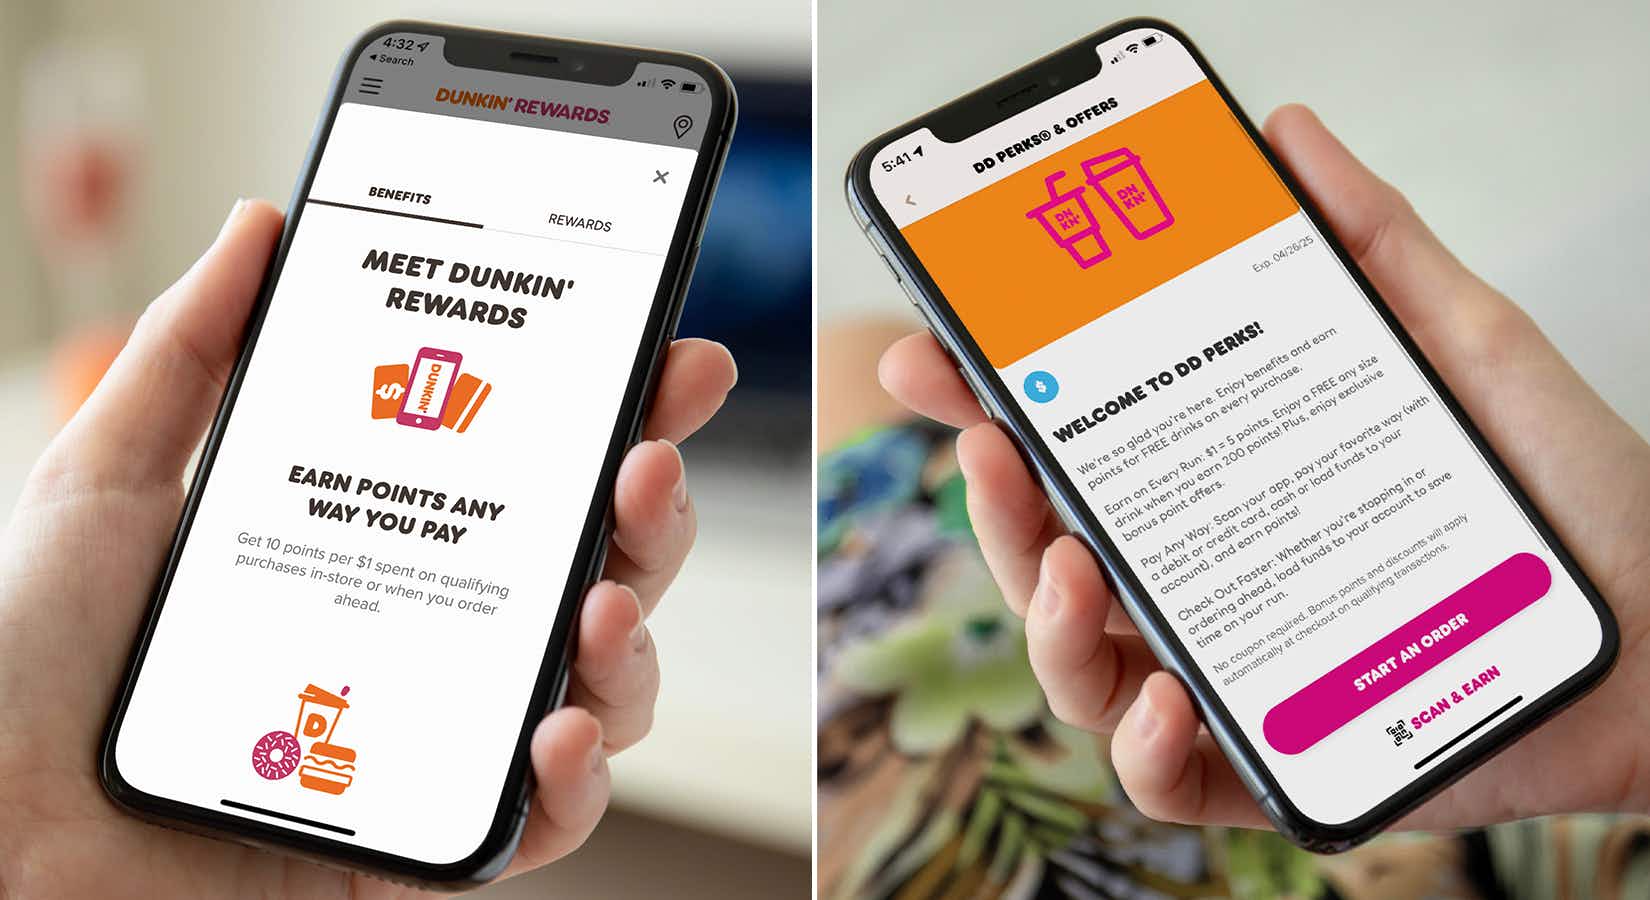 Two phones being held next to each other, one displaying the old Dunkin DD Perks app and the other displaying the new Dunkin Rewards app.